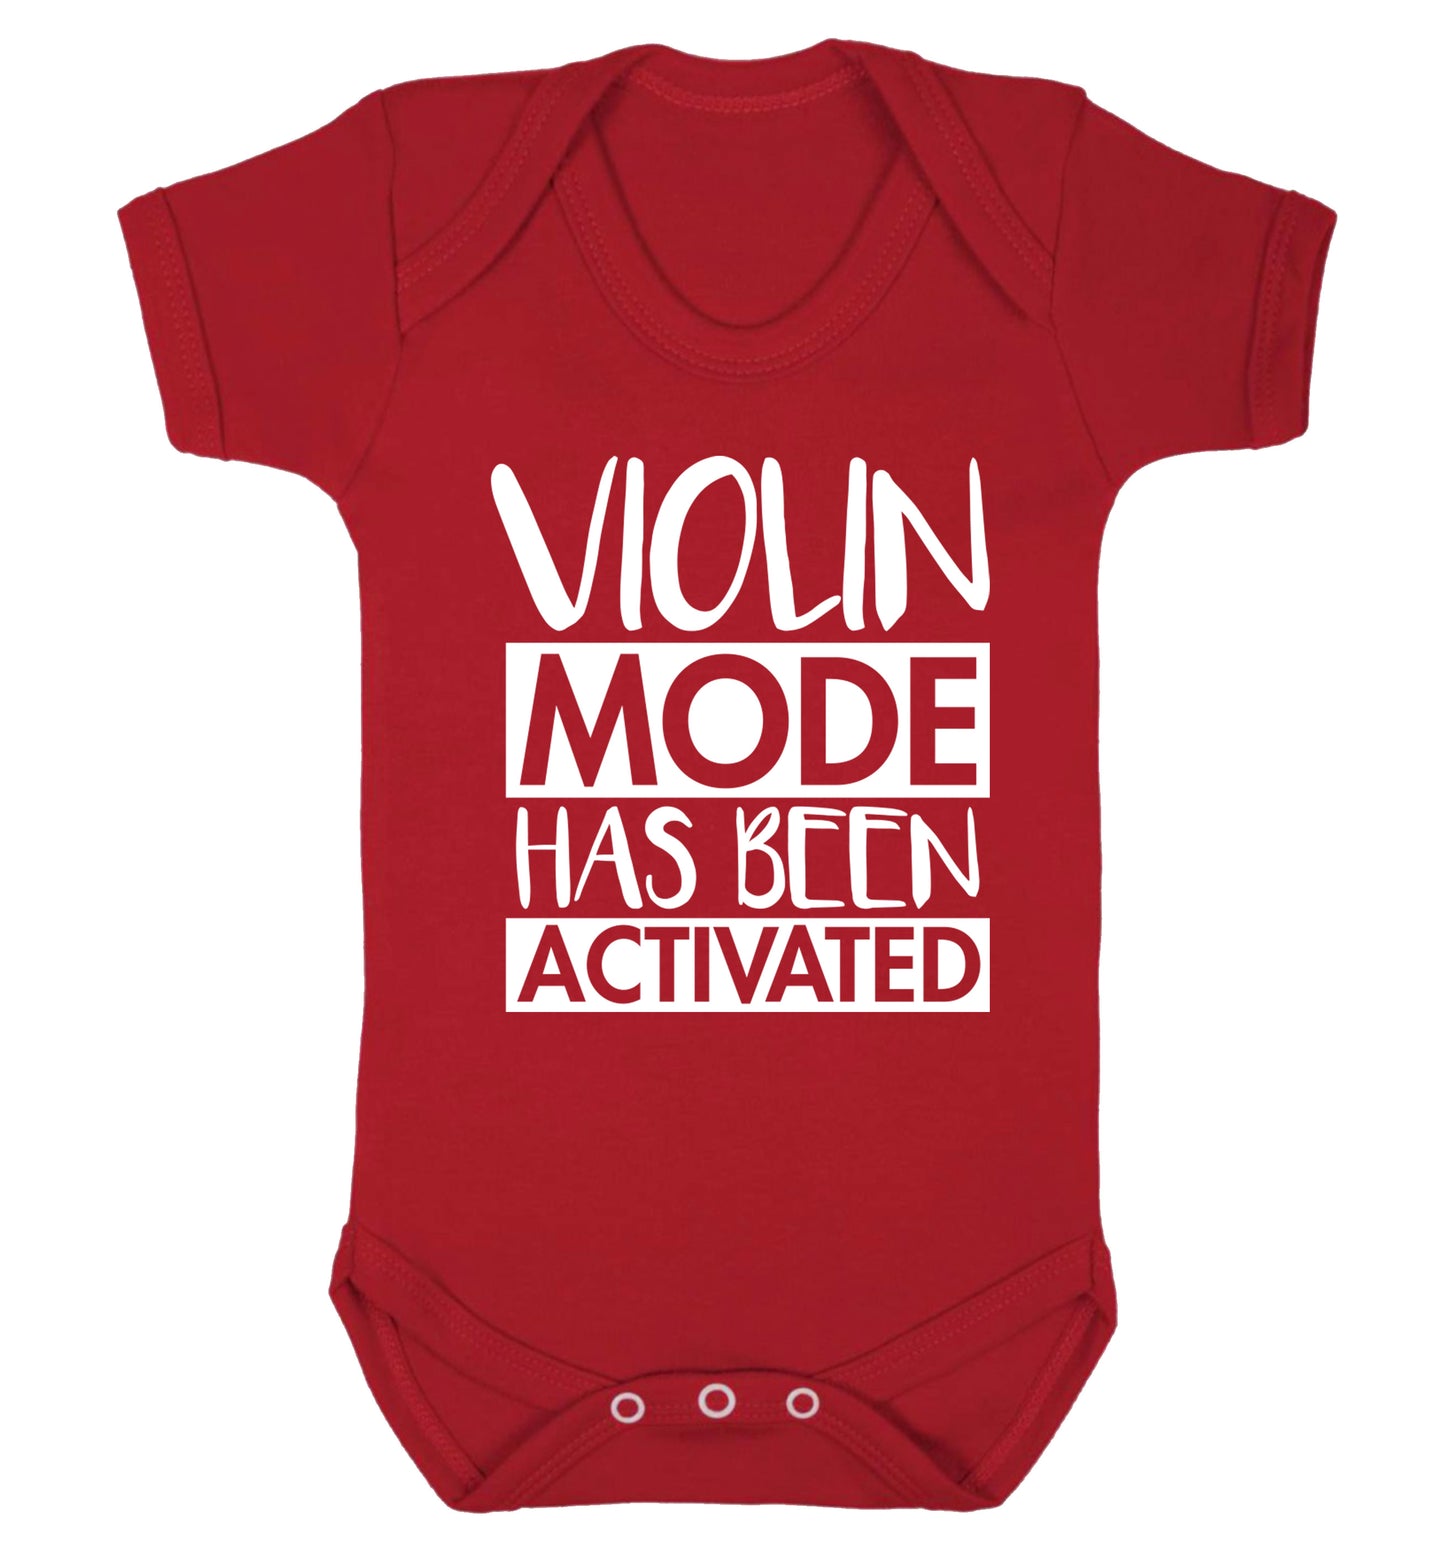 Violin Mode Activated Baby Vest red 18-24 months